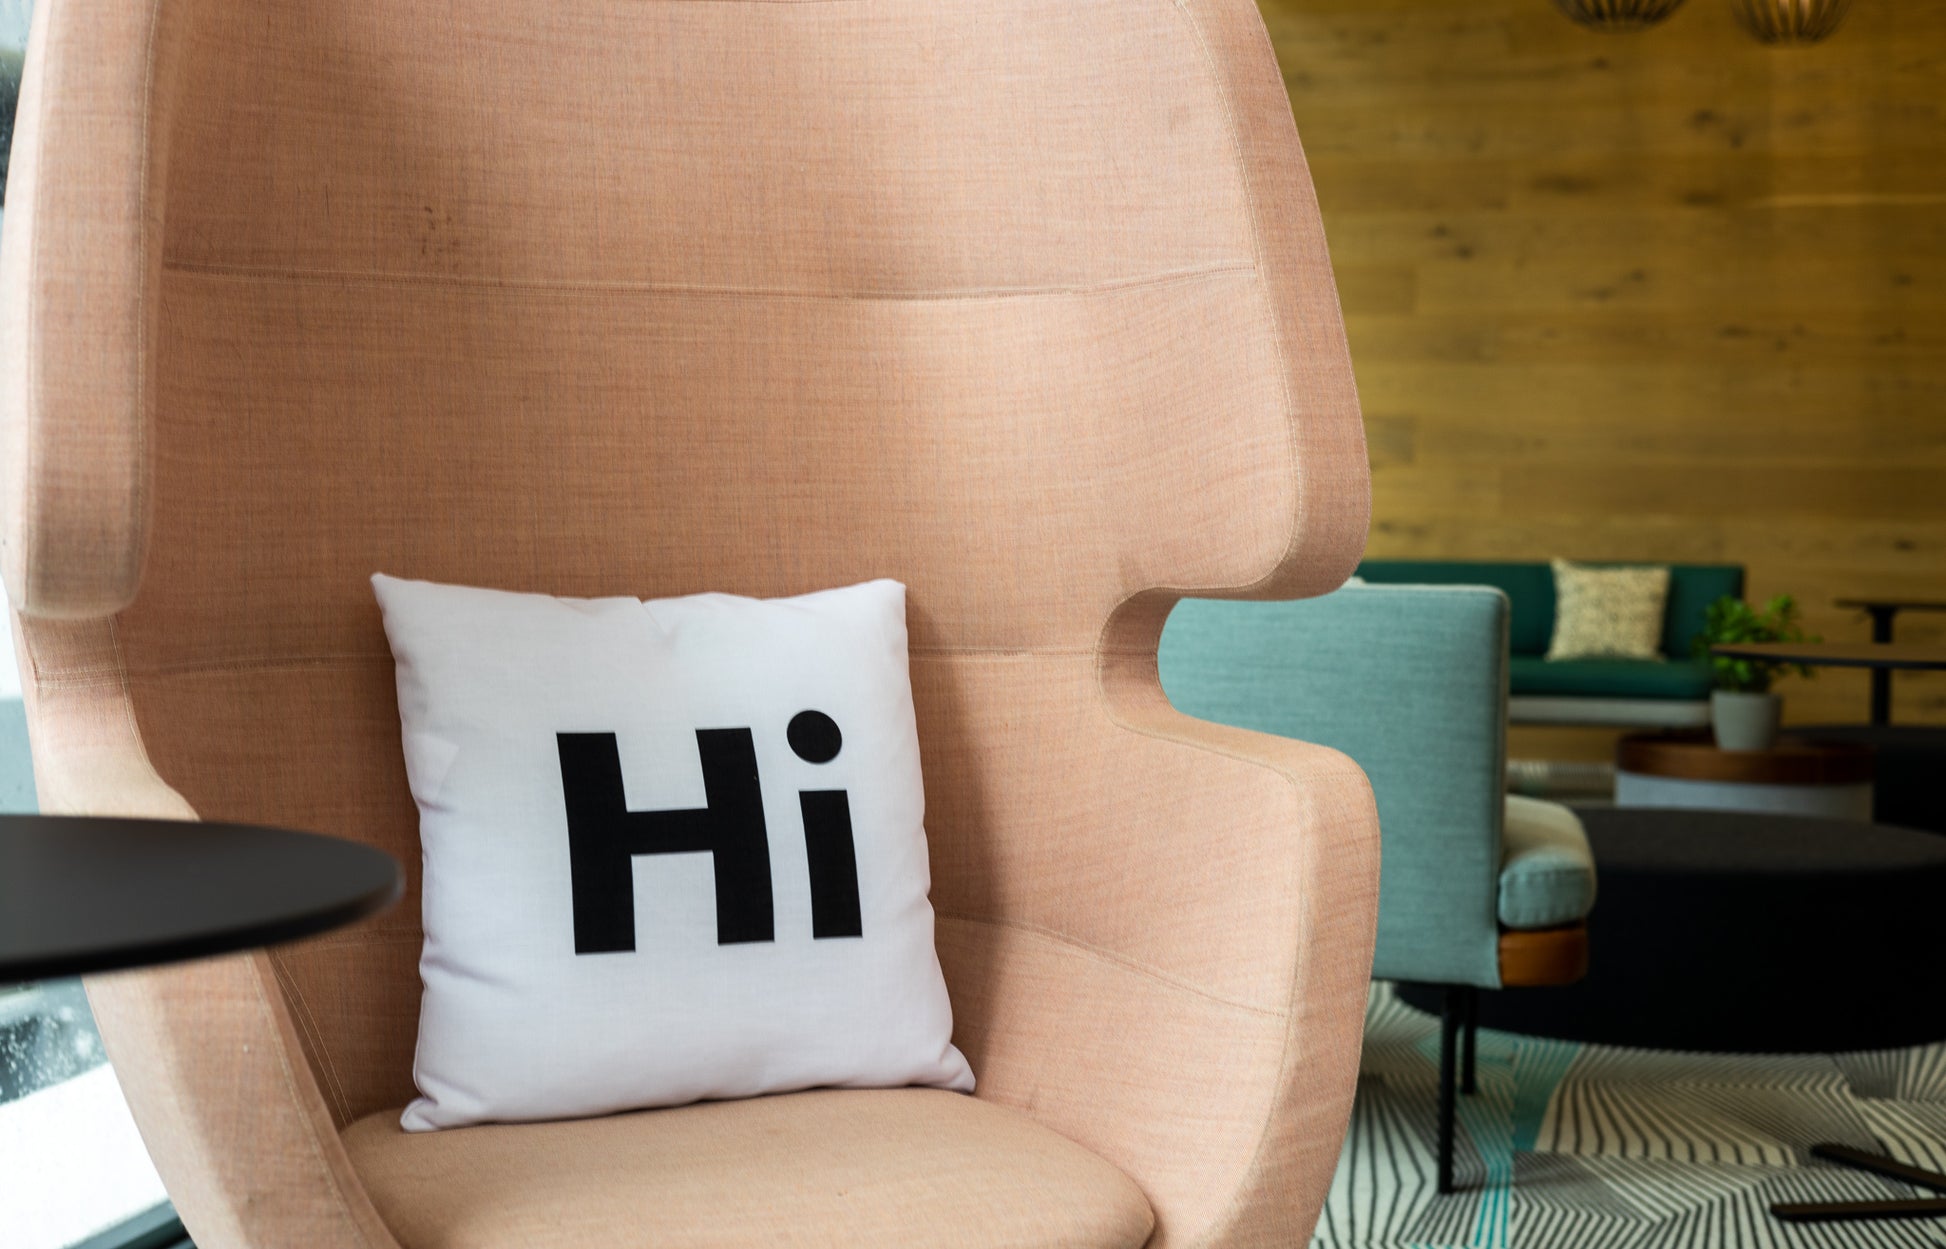 Hi Pillow by Hi Johnny in white in a coworking space lounge area